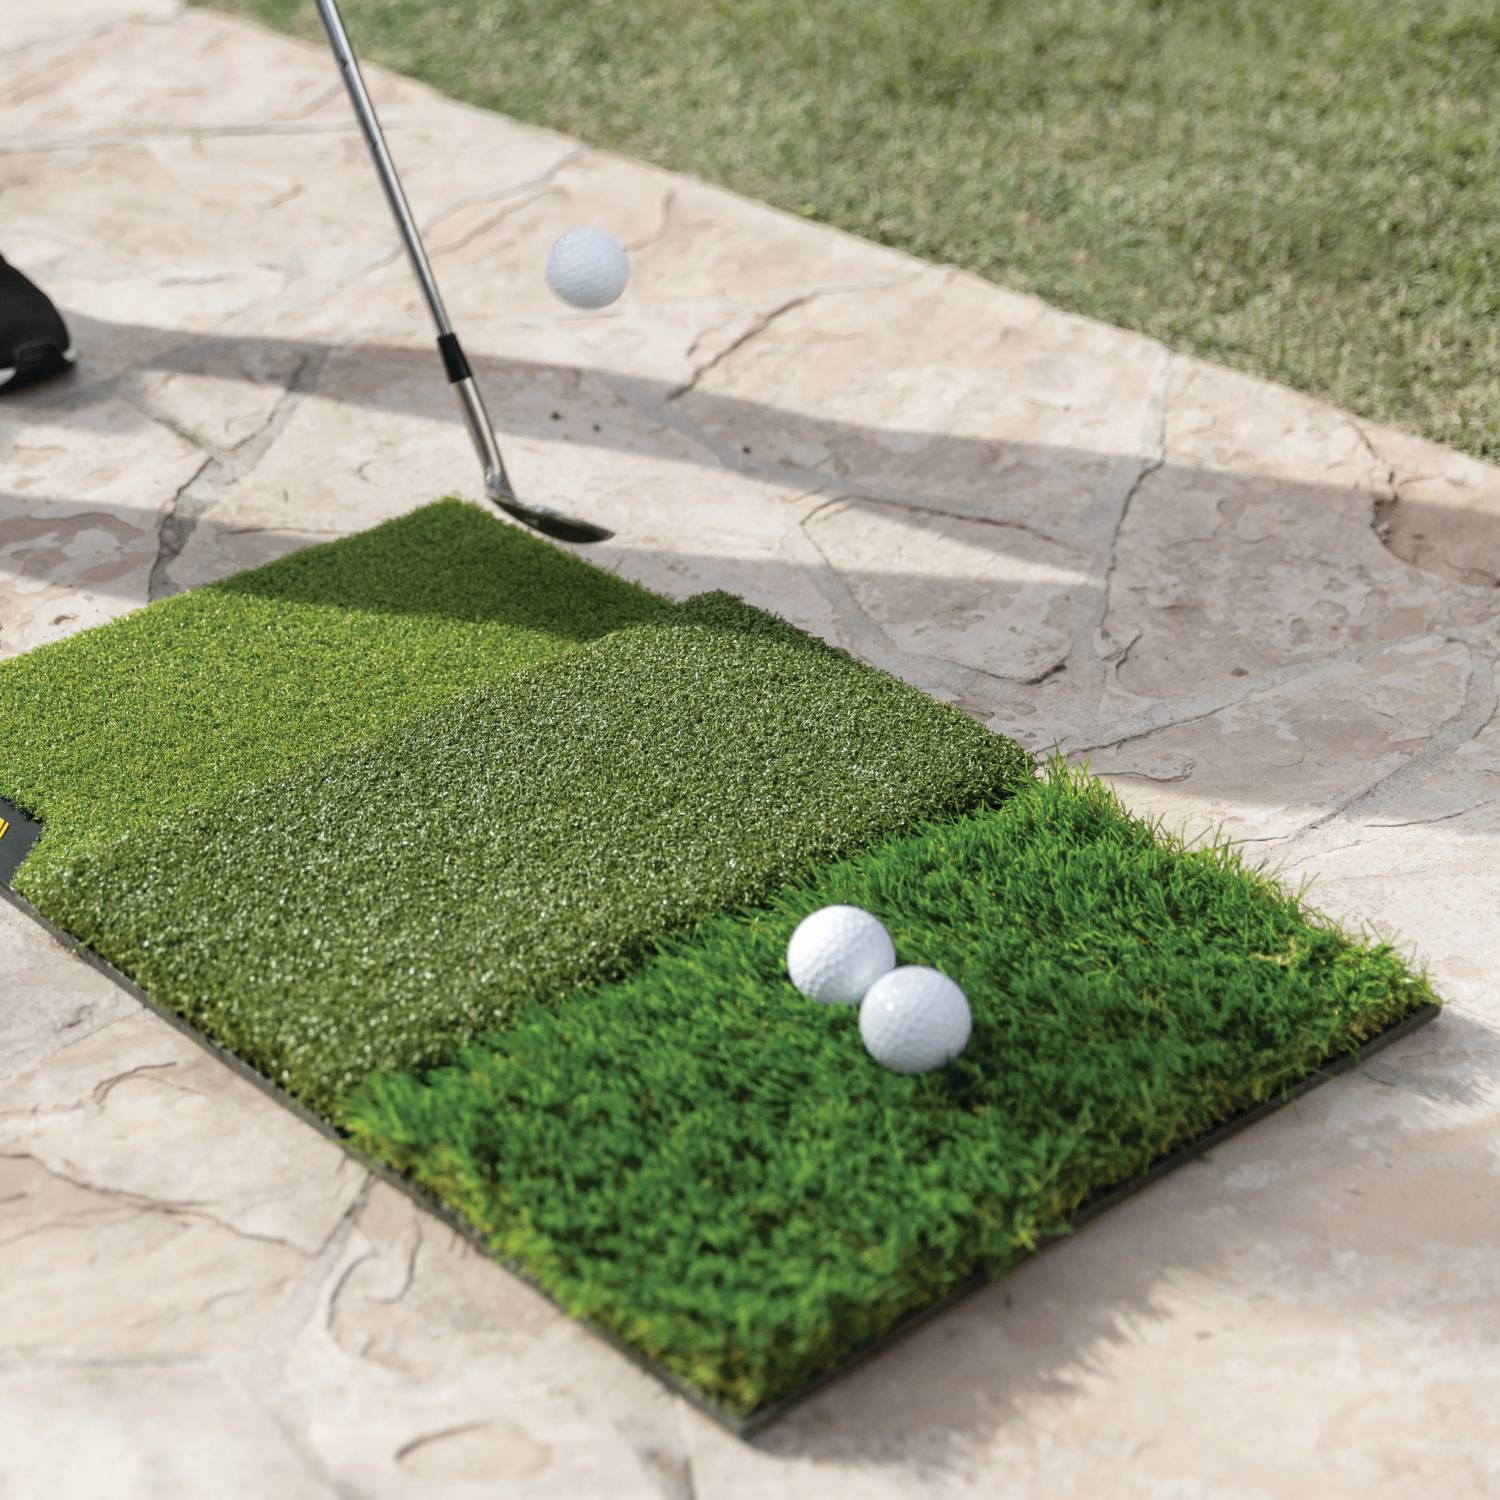 What Surface Do I Need To Put My Golf Mat On?